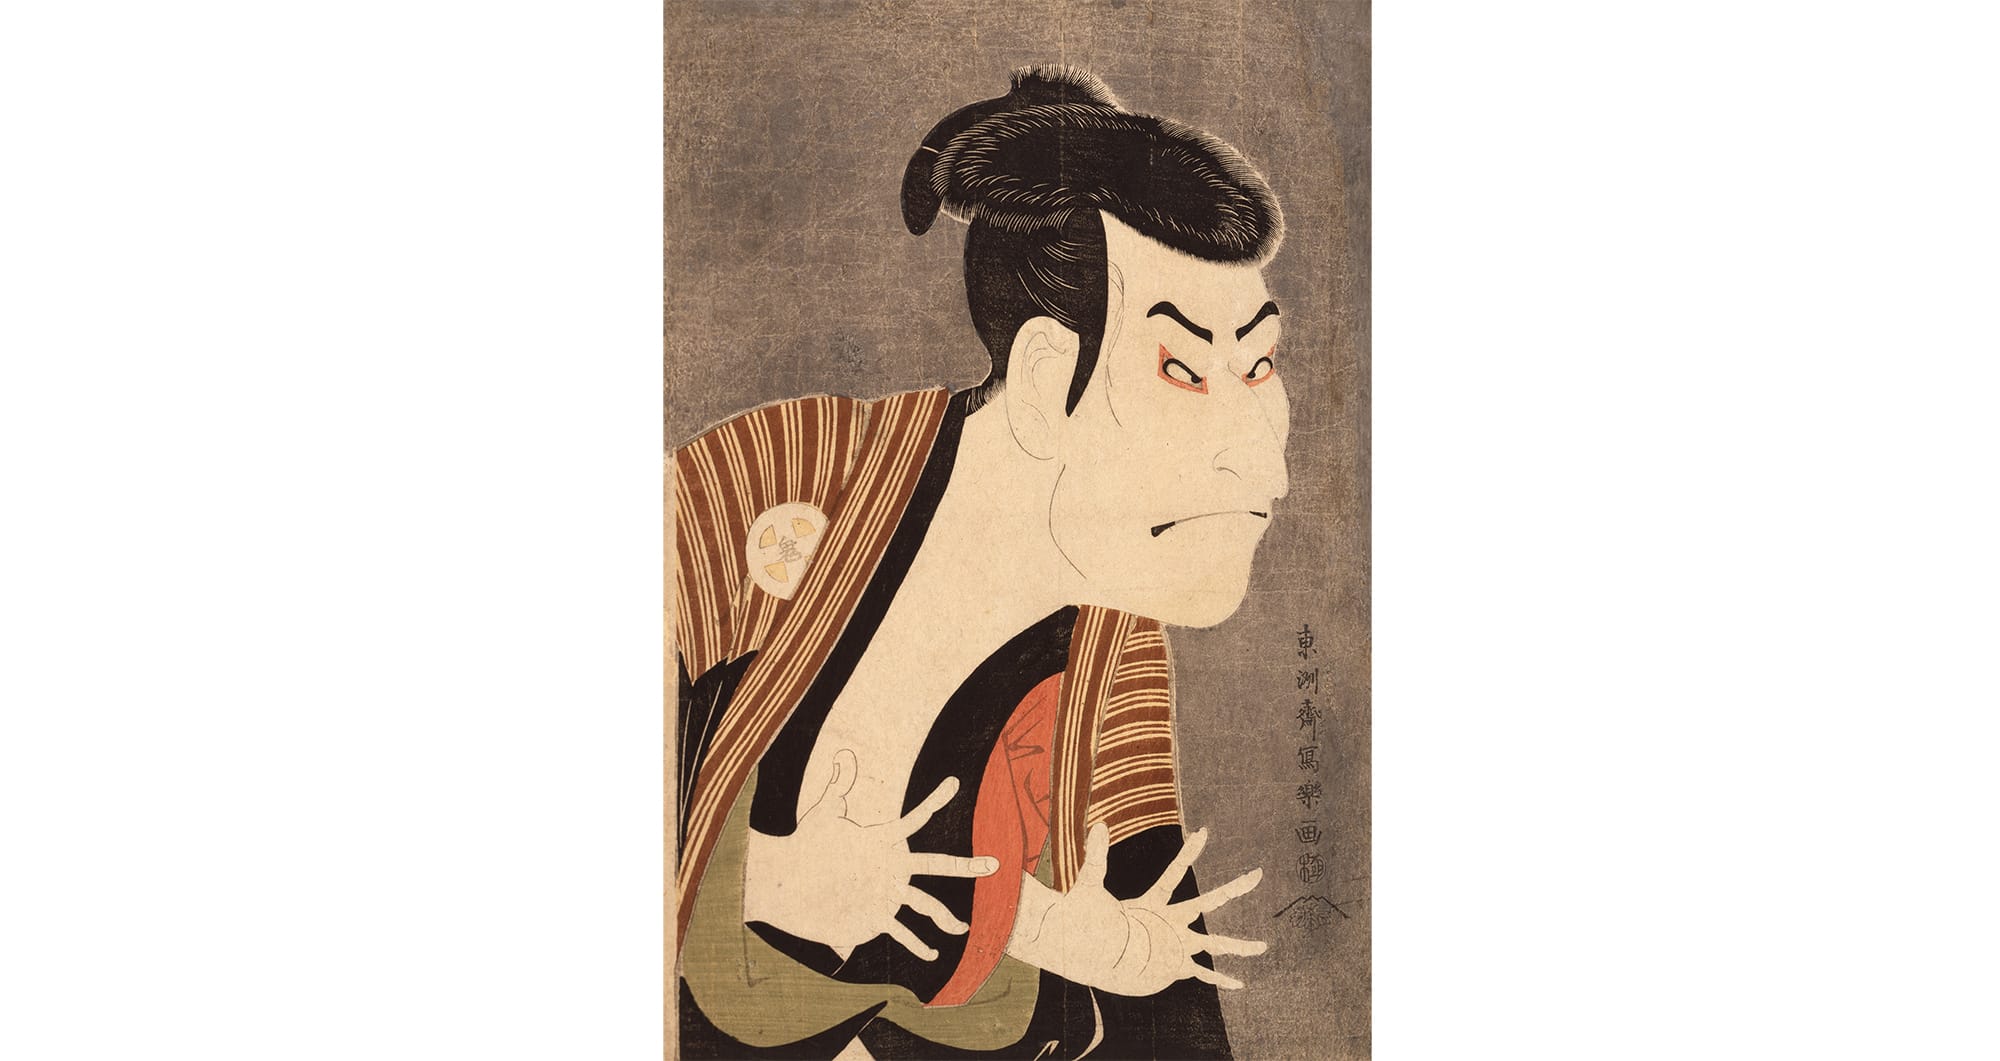 Toshusai Sharaku, The Actor Otani Oniji Ⅲ as Edobei, Oban, Nishiki-e, May, 6th Year of the Kansei Era (1795) , Japan Ukiyo-e Museum. Similar to the photographic portraits of celebrities we have today, the Yakusha-e (Actor Prints) became popular among common people and lead to making the ukiyo-e to become a part of their lives.